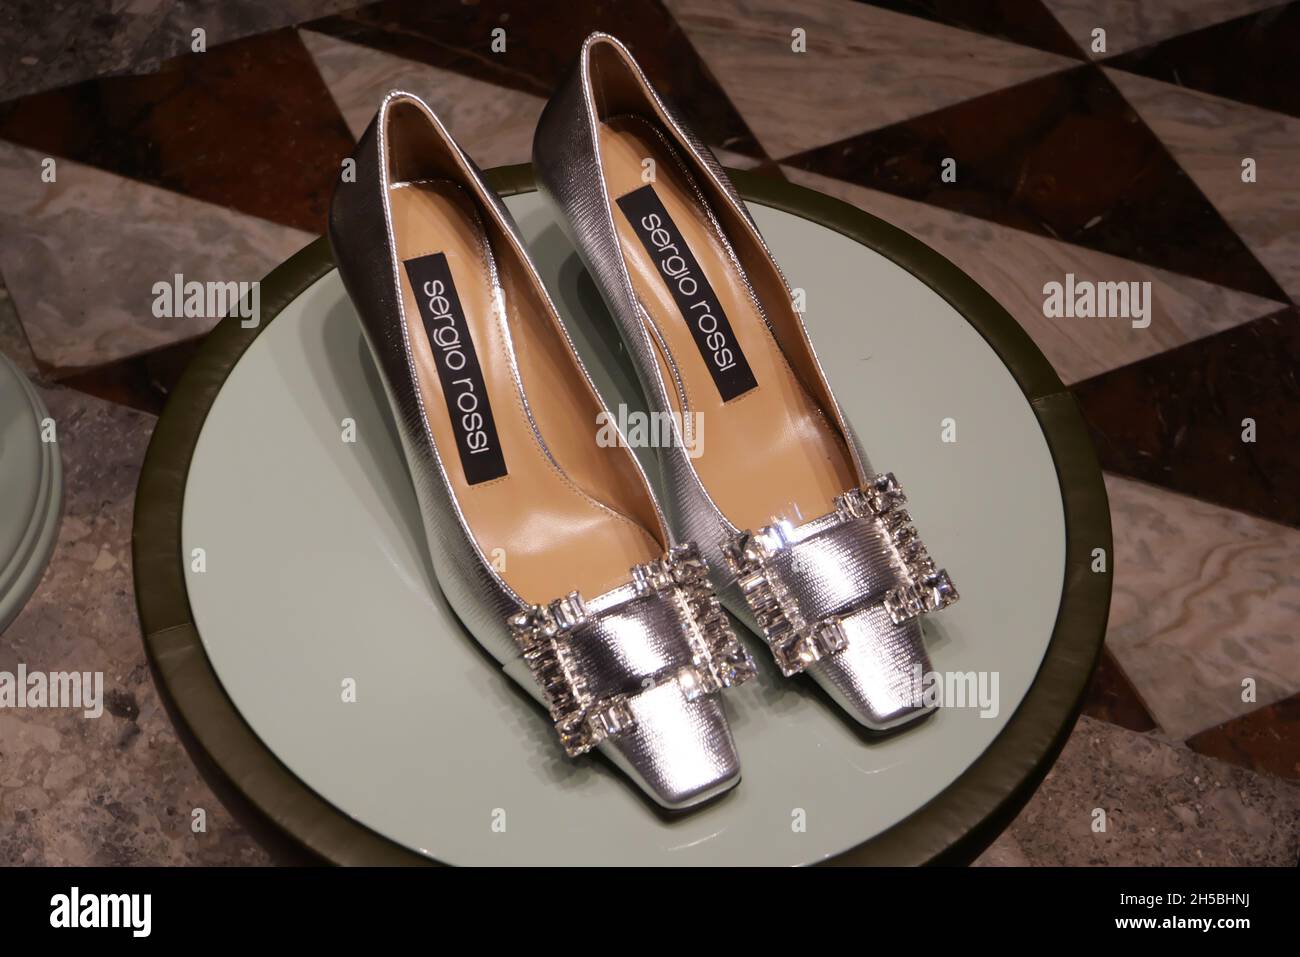 SHOES ON DISPLAY AT SERGIO ROSSI FASHION BOUTIQUE Stock Photo - Alamy